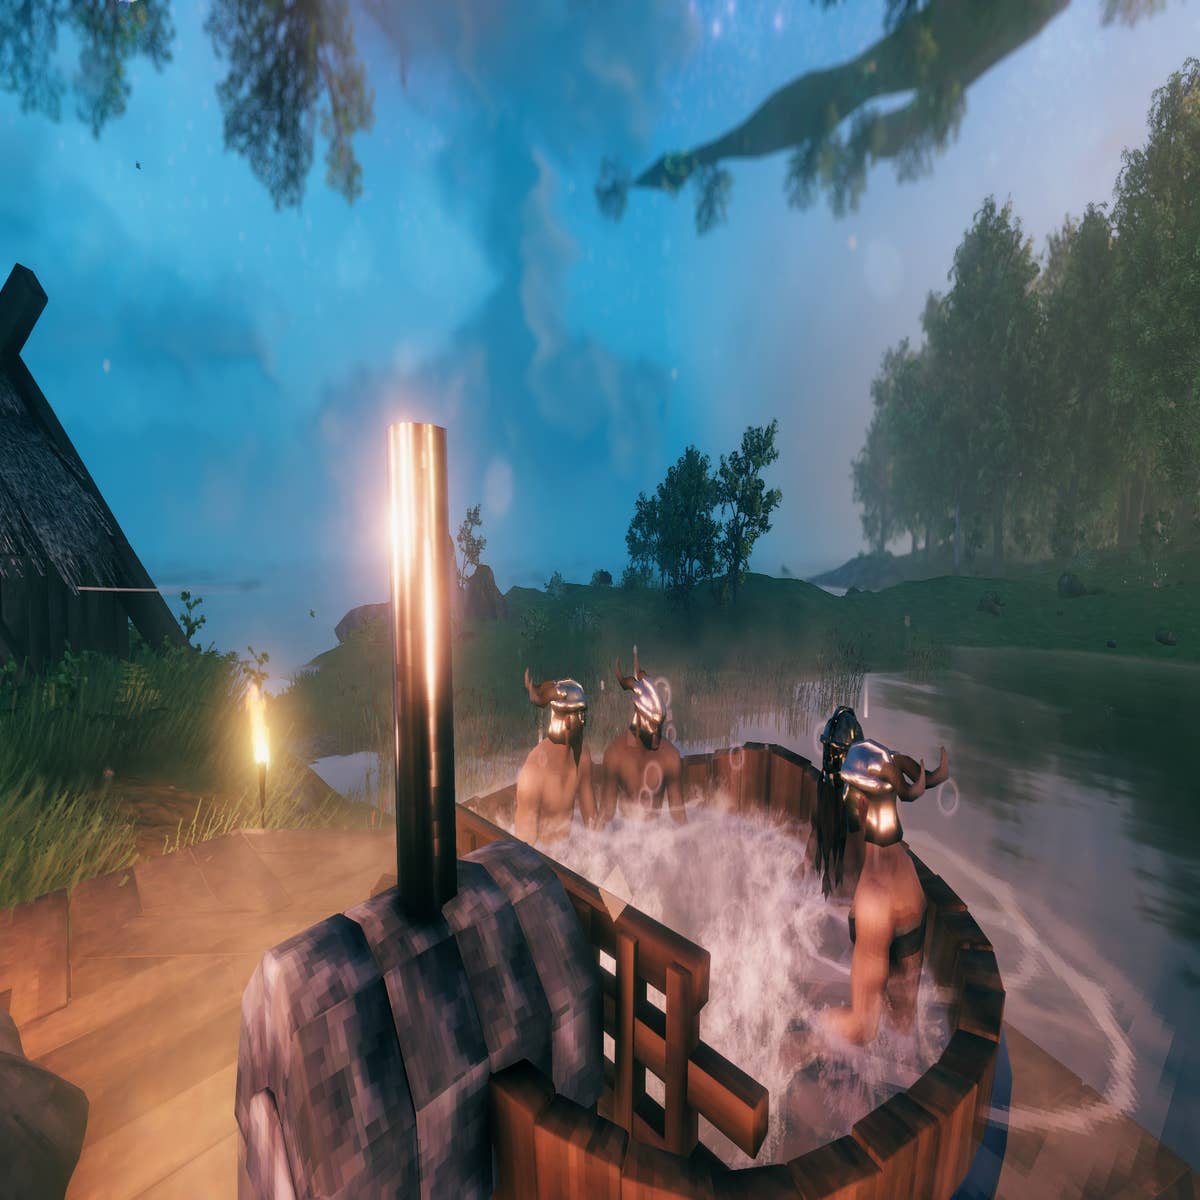 Valheim Steam Database Update Could Be Hinting a Mac Port